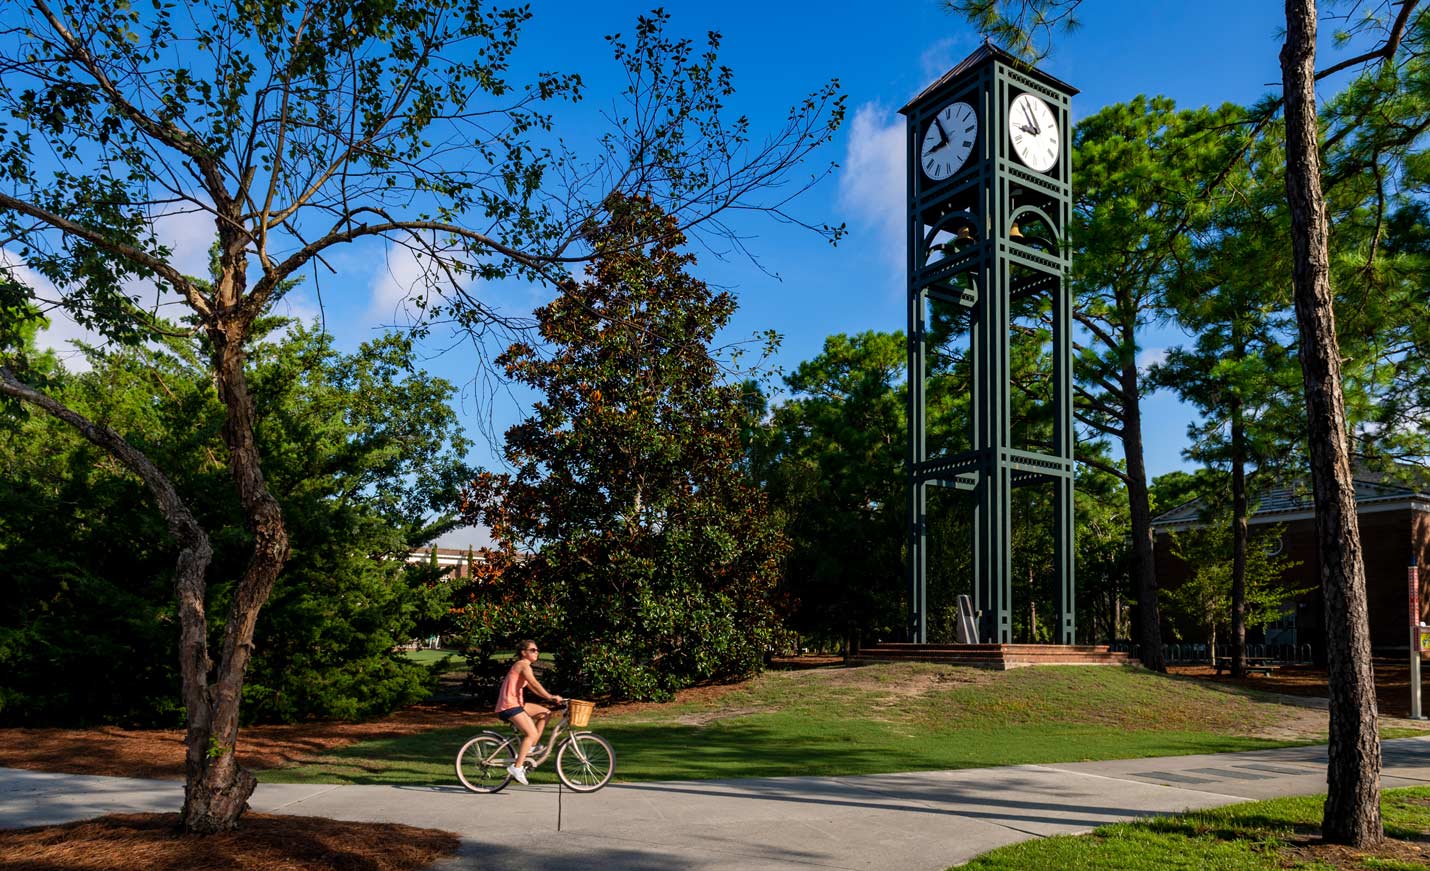 The UNCW clock tower looms large among the trees with a student riding past the campus landmark